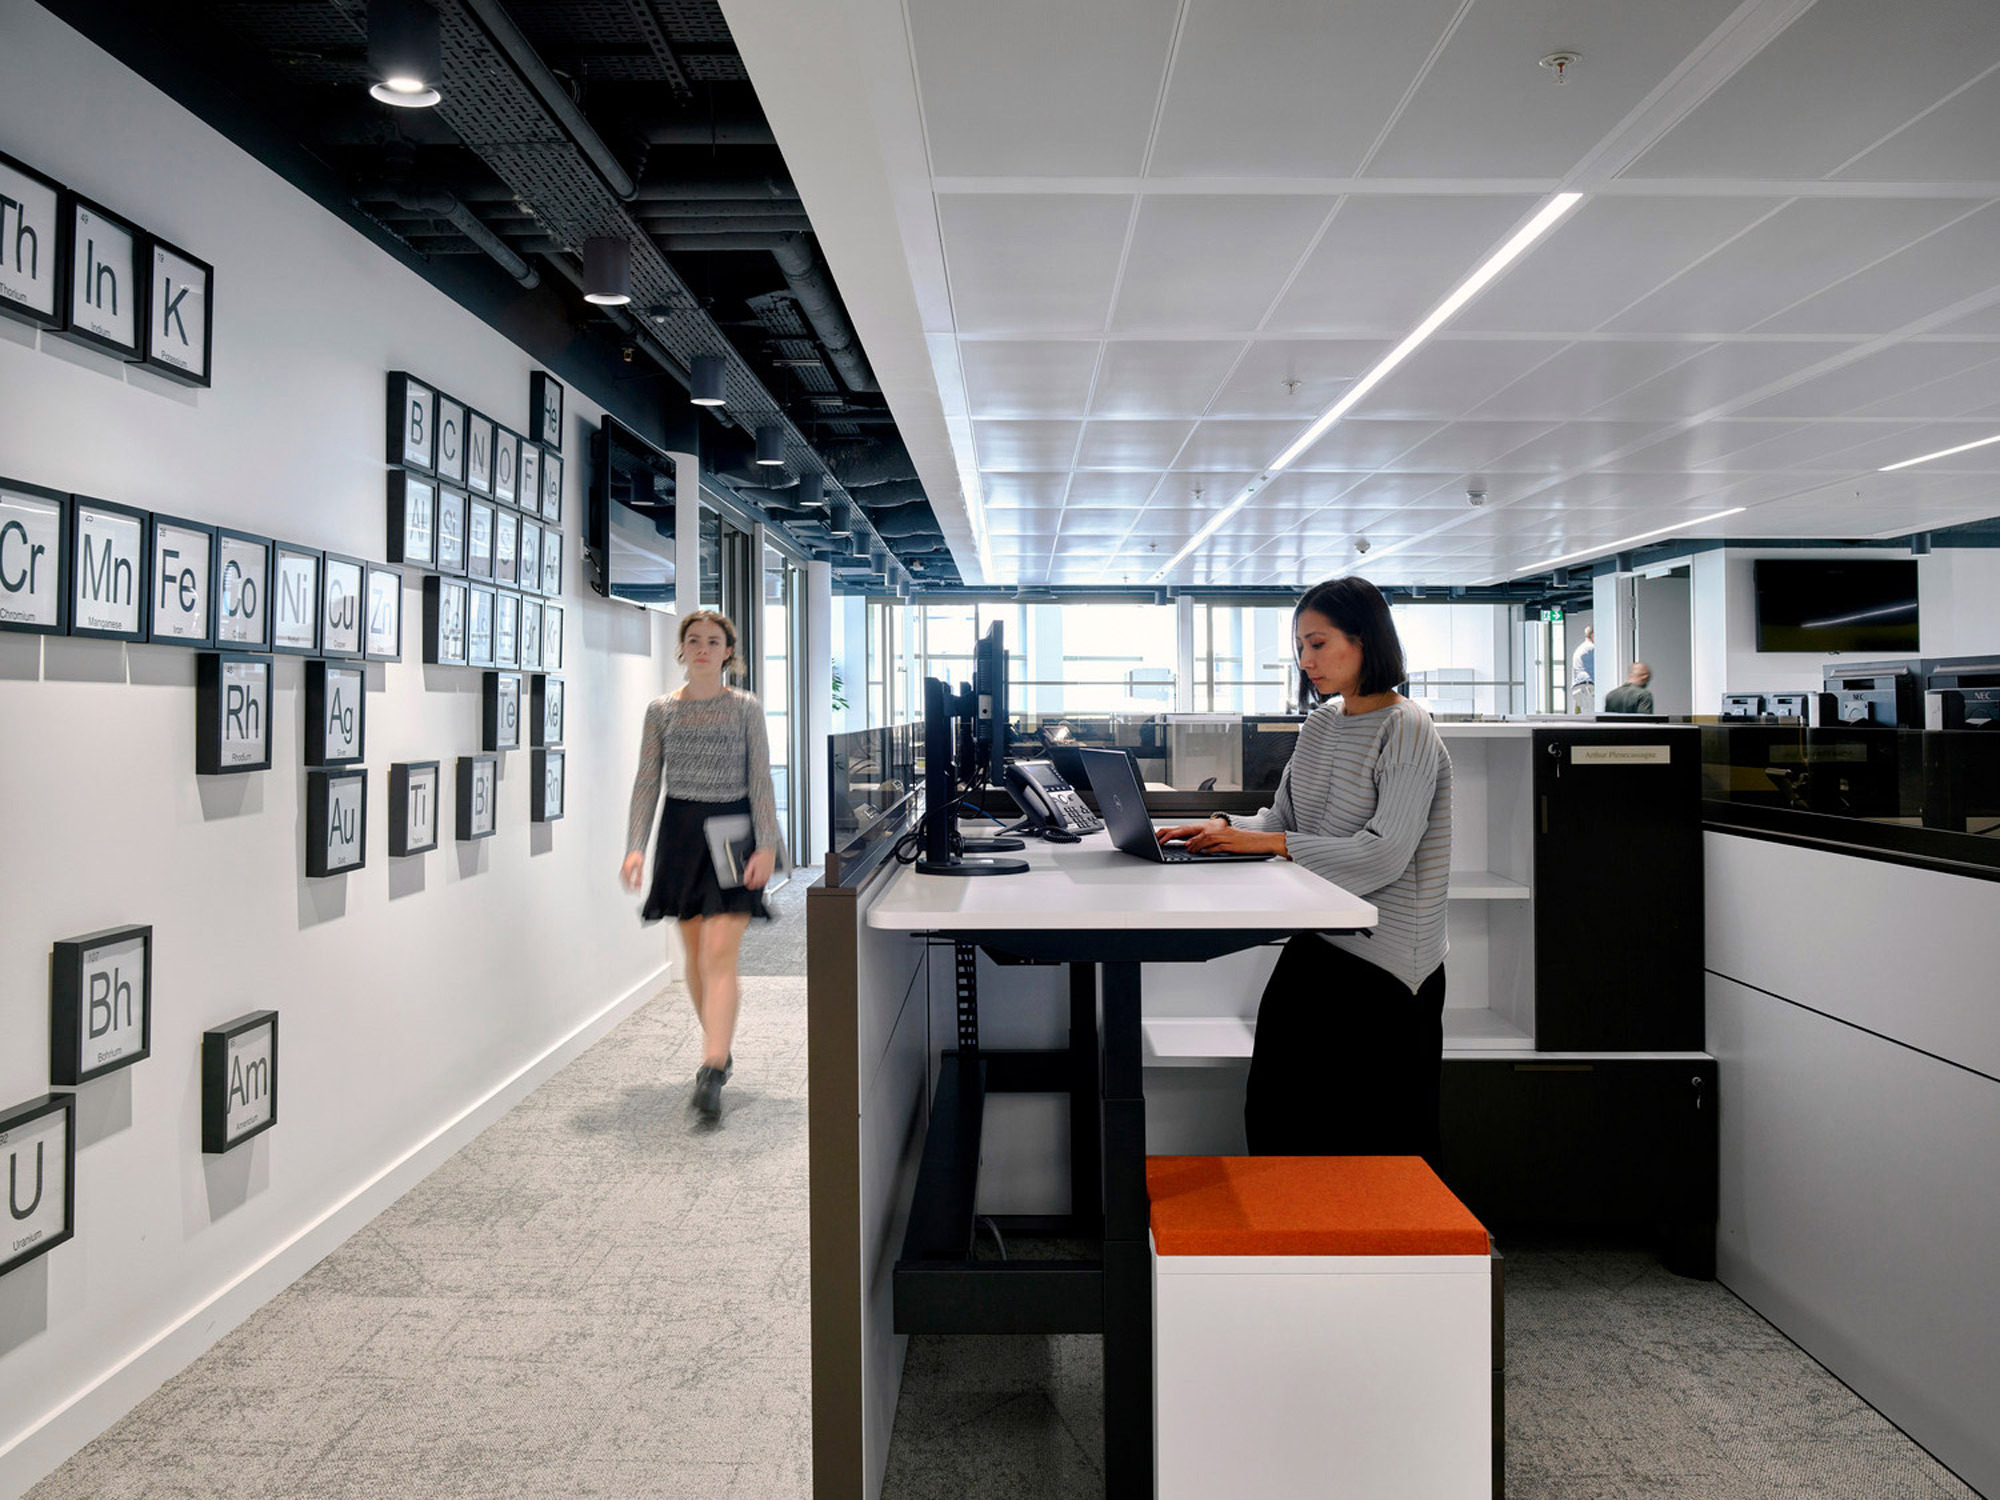 A modern office space with an open floor plan featuring a standing work station, periodical table-themed wall art, and sleek, monochromatic color scheme. Employees engage in a productive, contemporary environment.